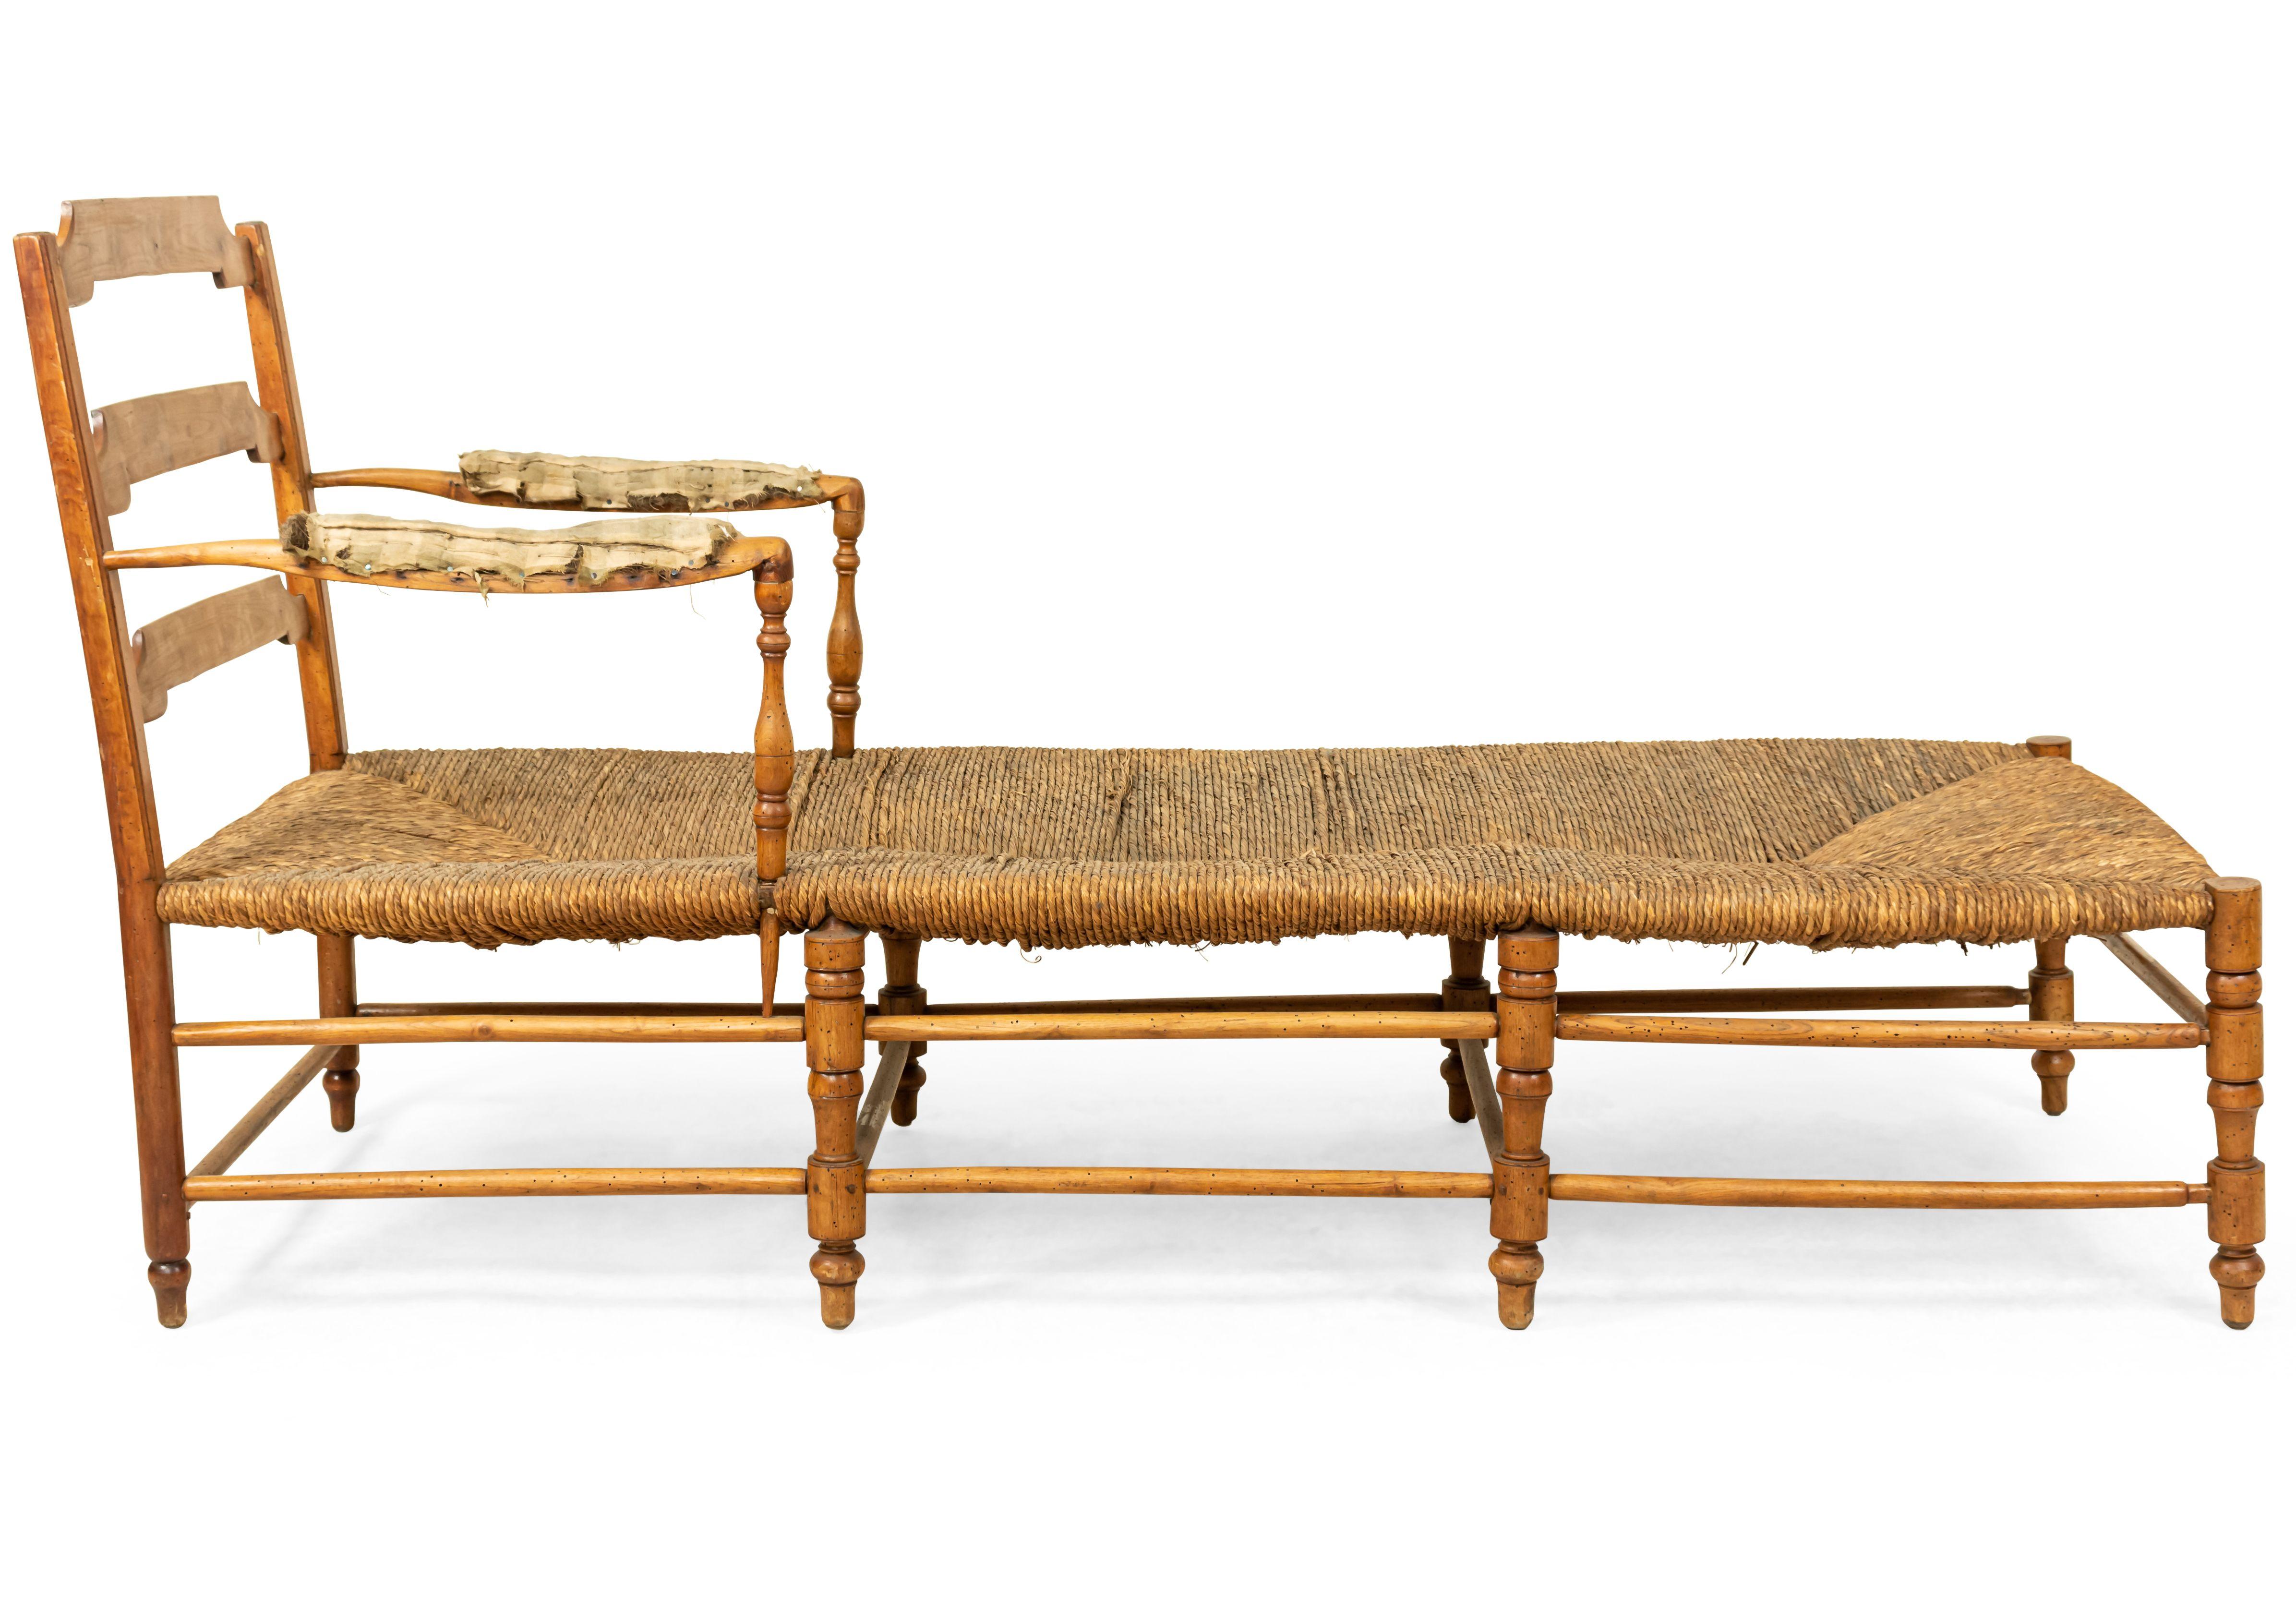 French Provincial (19th century) fruitwood ladder back chaise with rush seat.